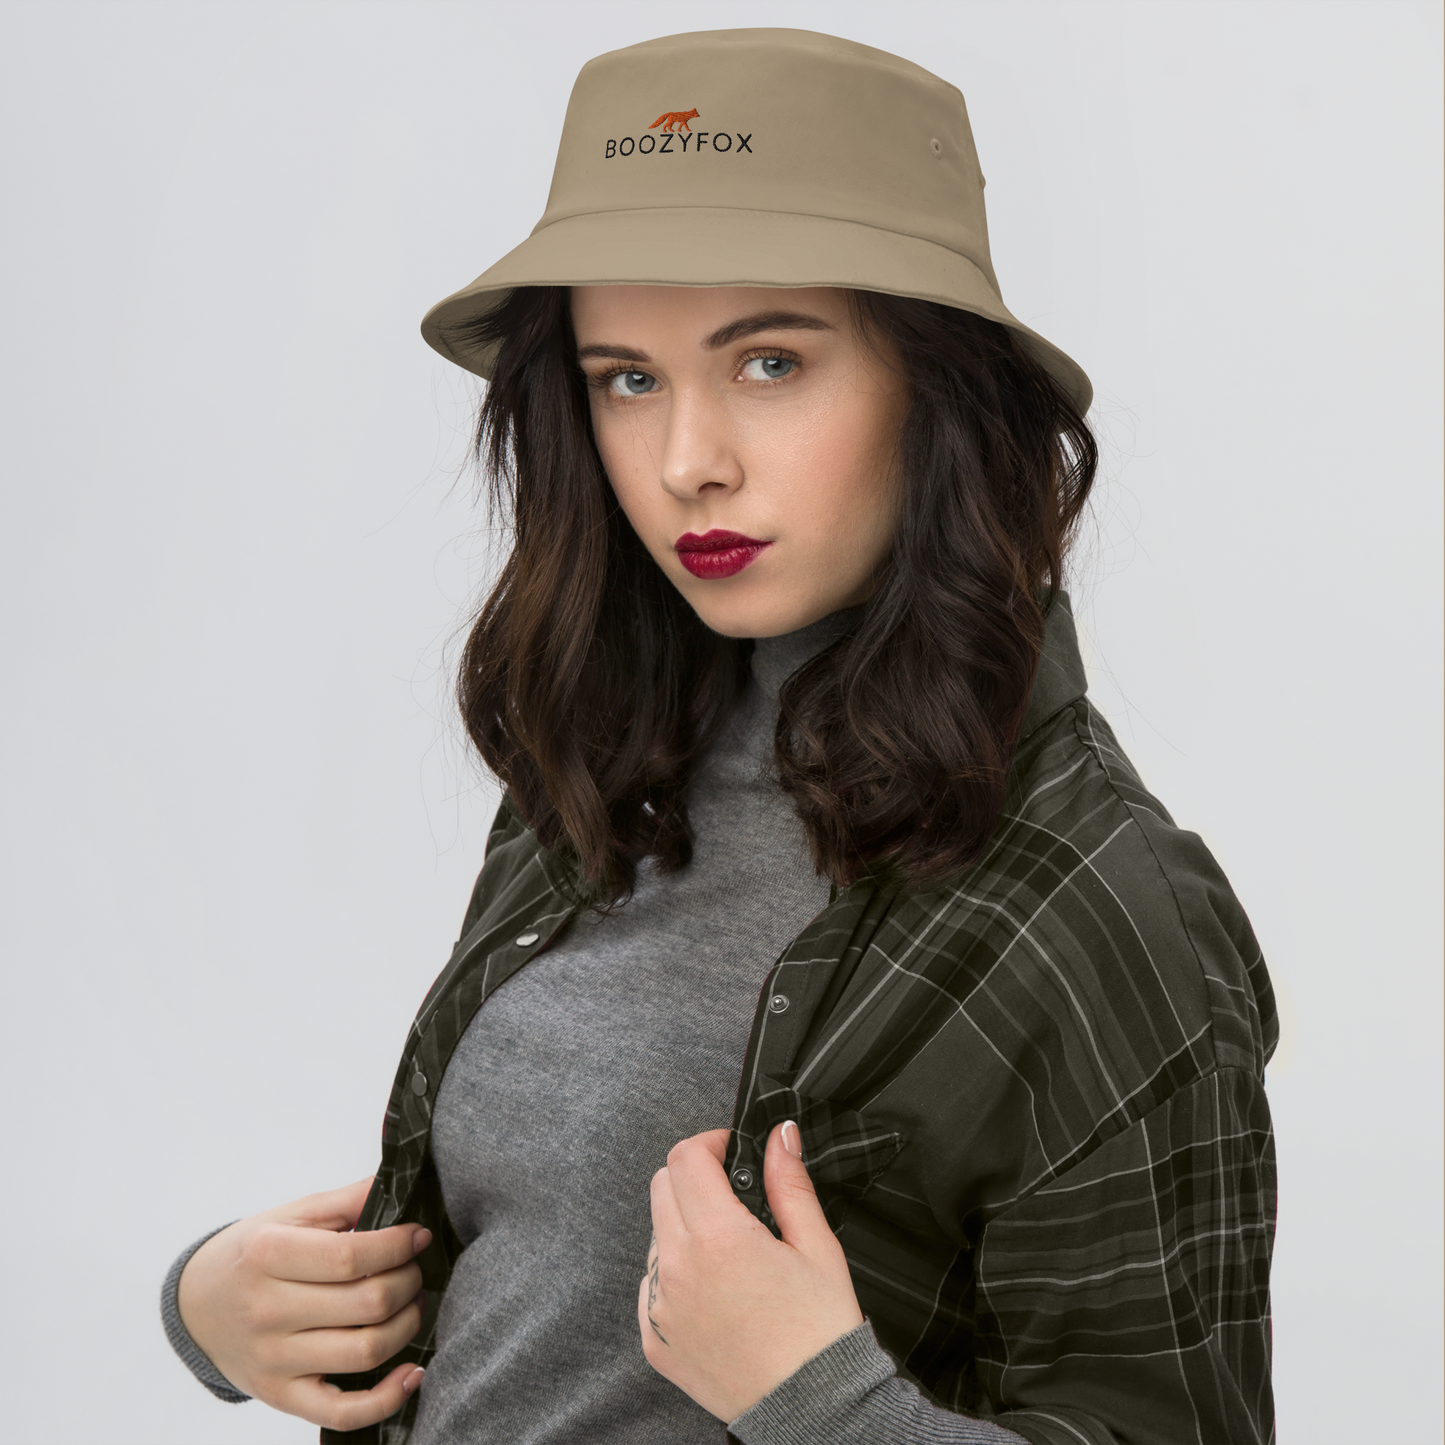 Woman wearing a Cool Khaki Bucket Hat featuring a striking embroidered Boozy Fox logo on front. Shop Cool Sun Protection Bucket Hats And Wide Brim Hats Online - Boozy Fox